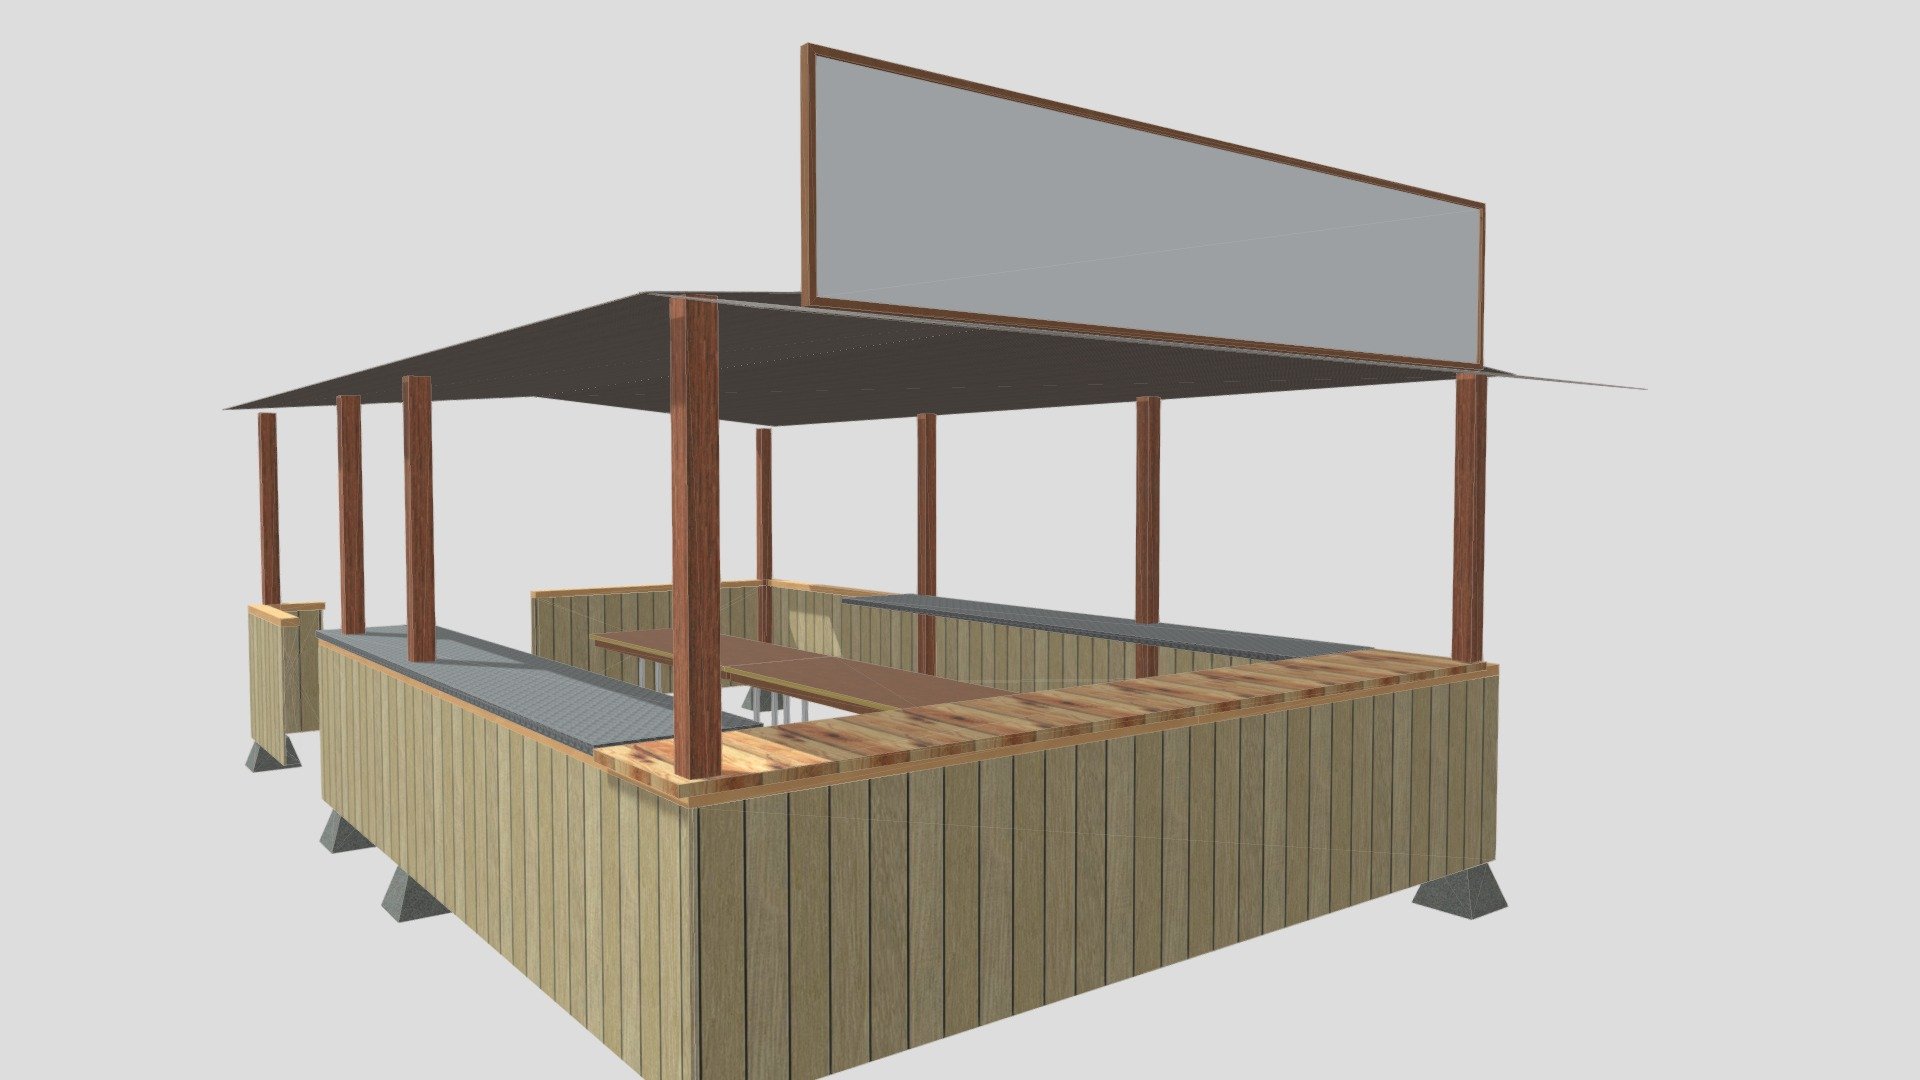 Oregon country Fair Booth 310 - OCF Falafel Booth 310 - Download Free 3D model by fldrafting 3d model